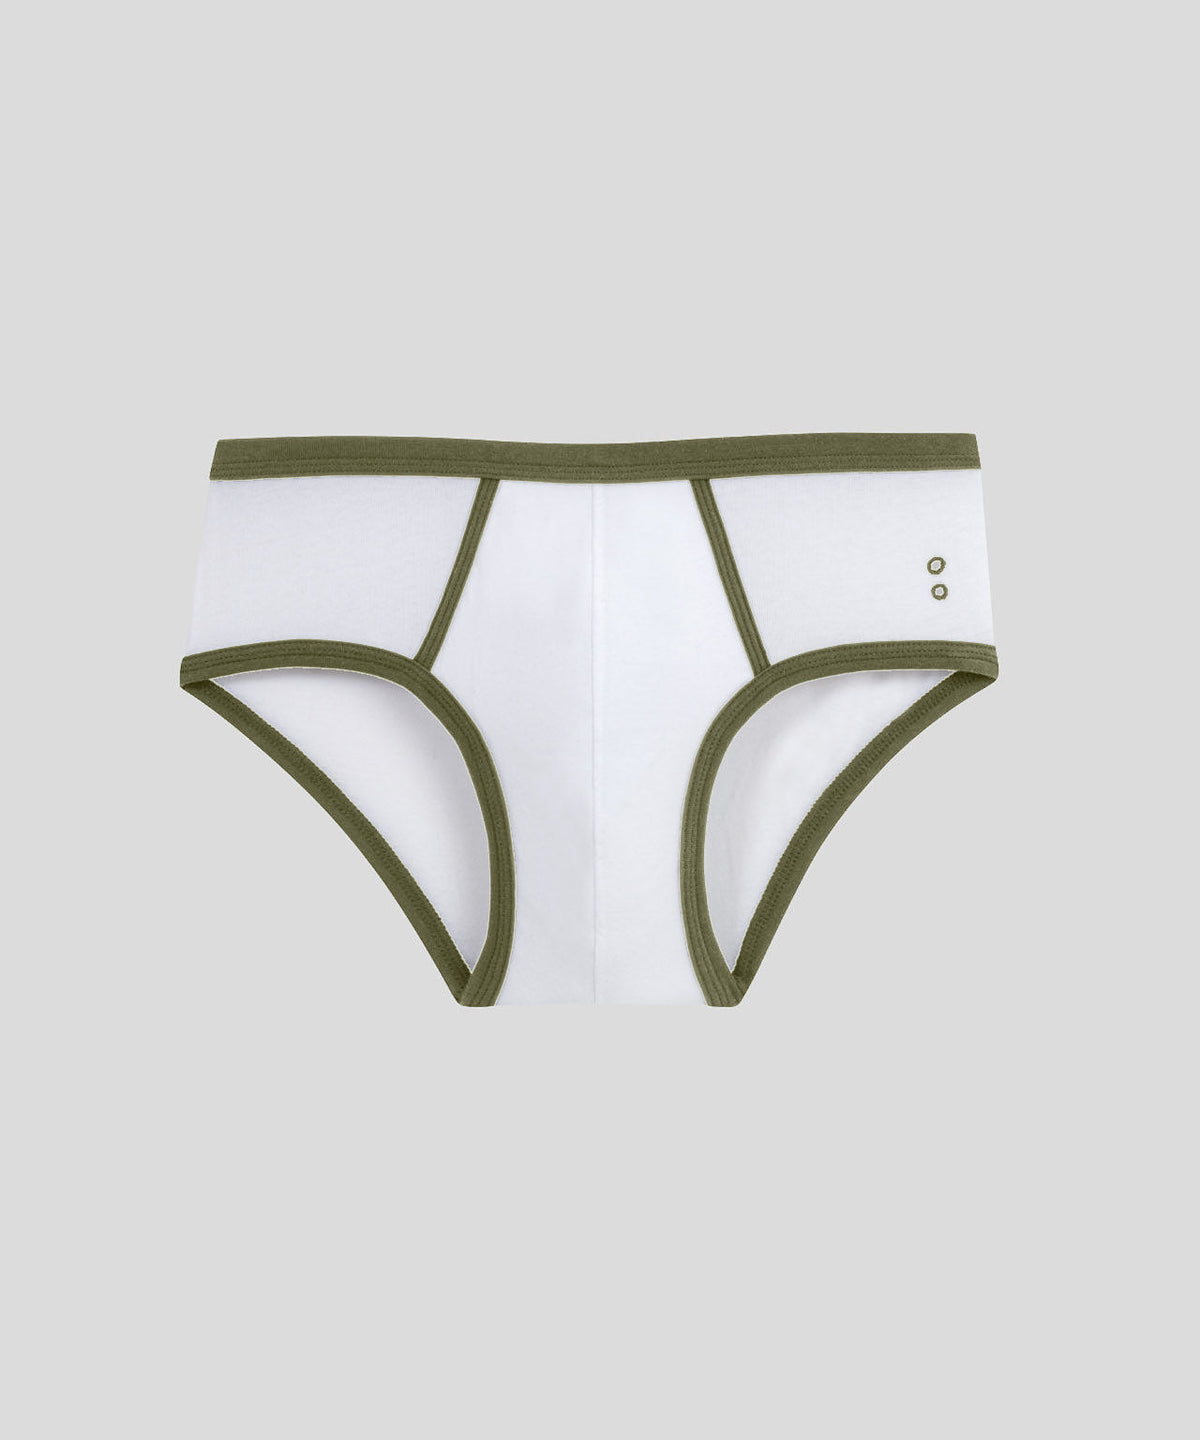 Y-Front Sports Briefs: Olive Green / White